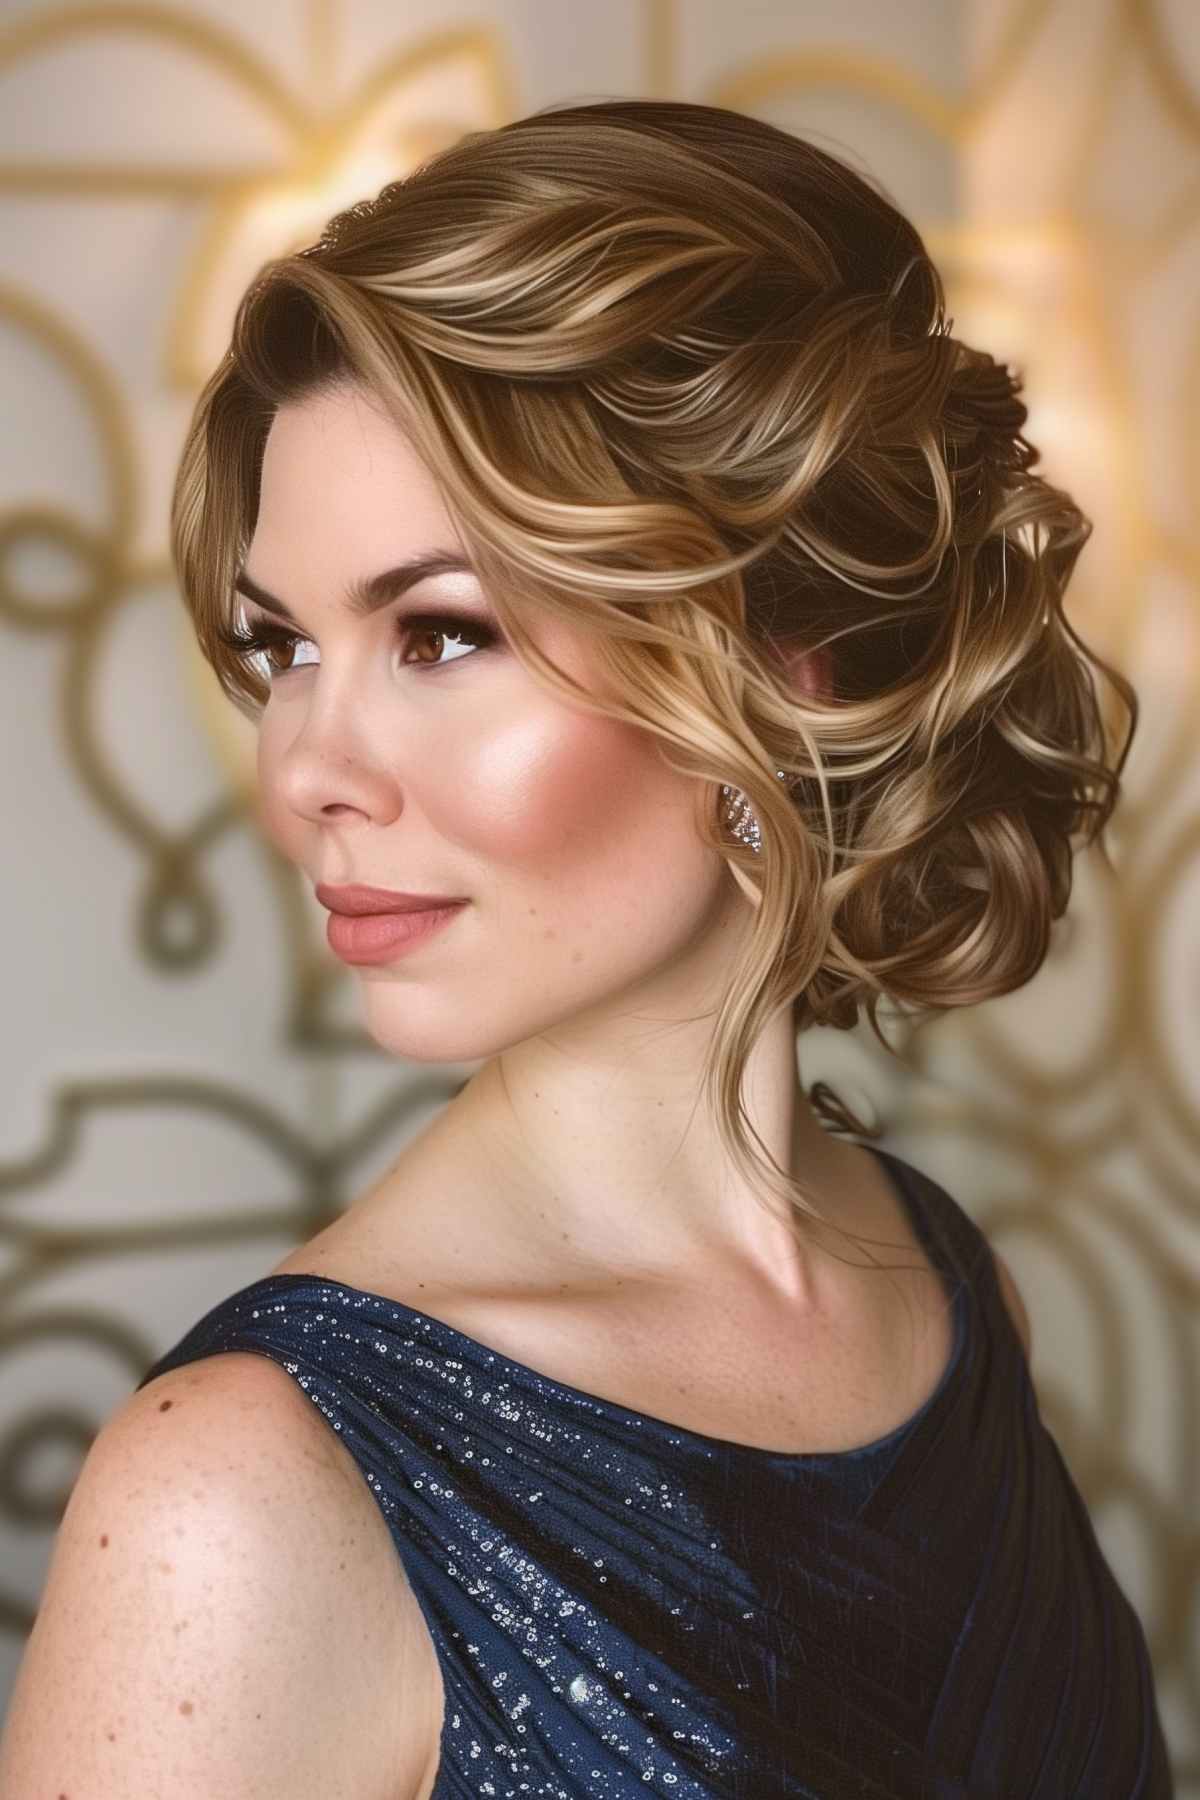 Elegant sculpted chignon with twists and curls, adding volume and sophistication for a wedding guest’s hairstyle.